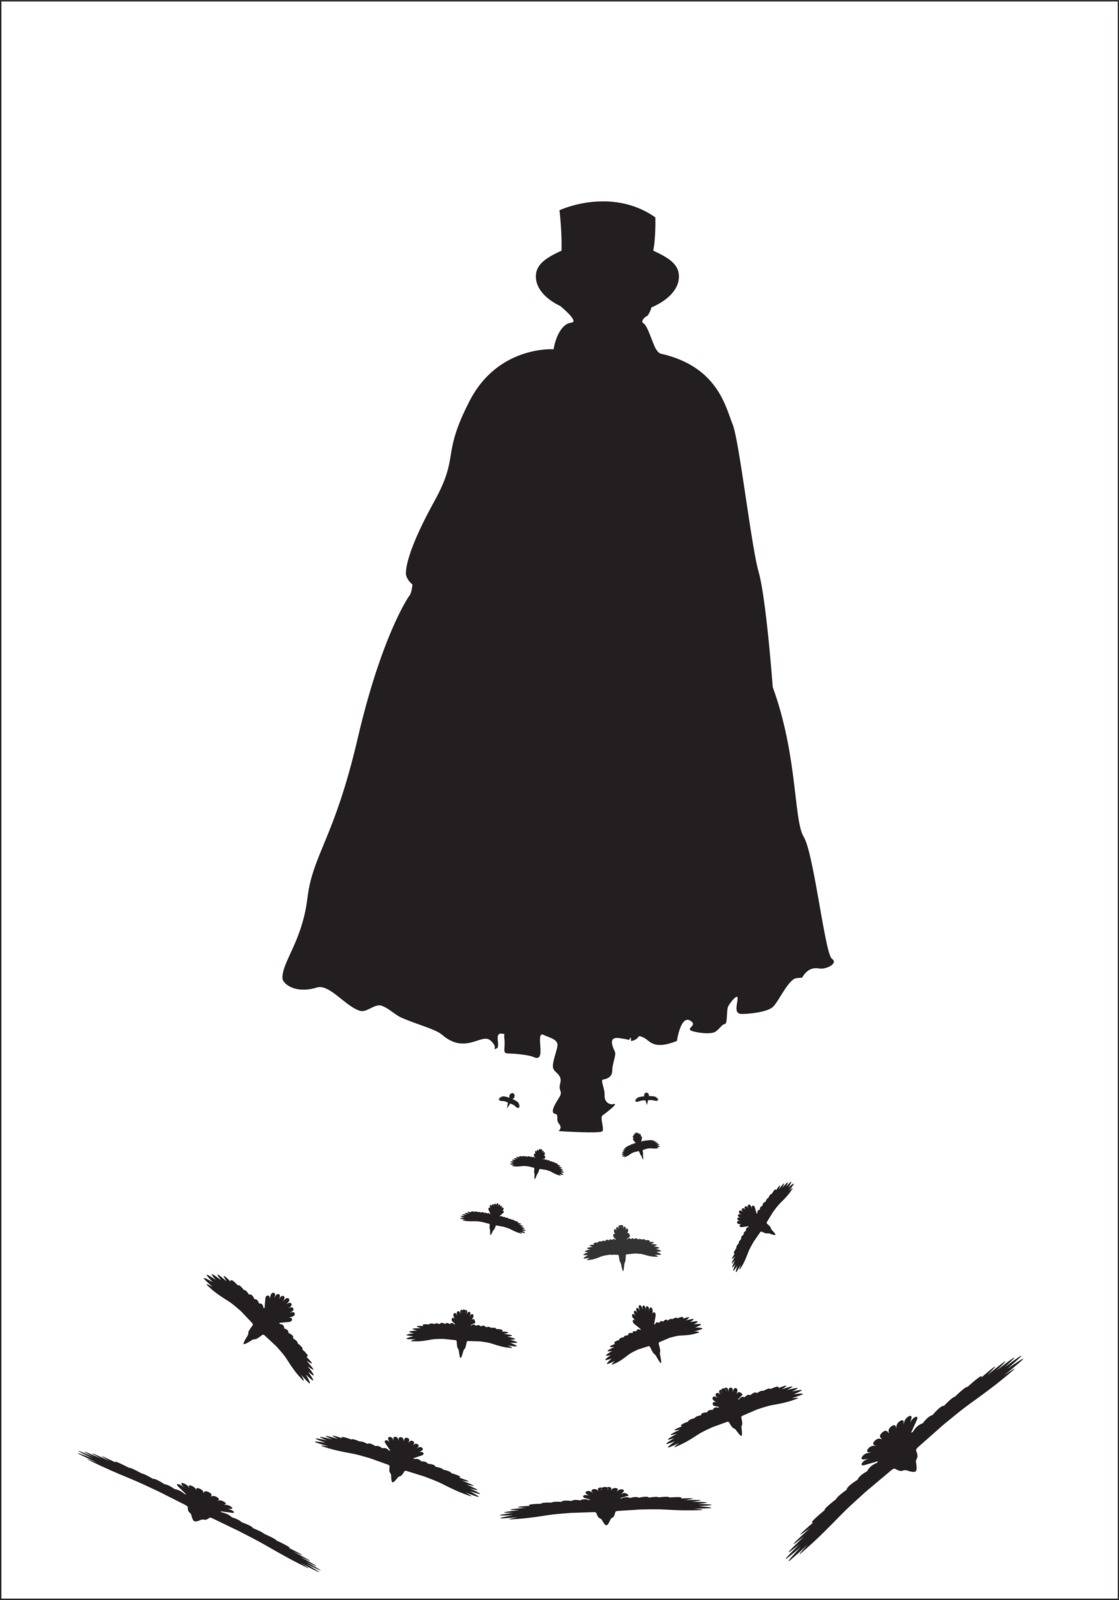 Jack the Ripper with Crows by DavidScar